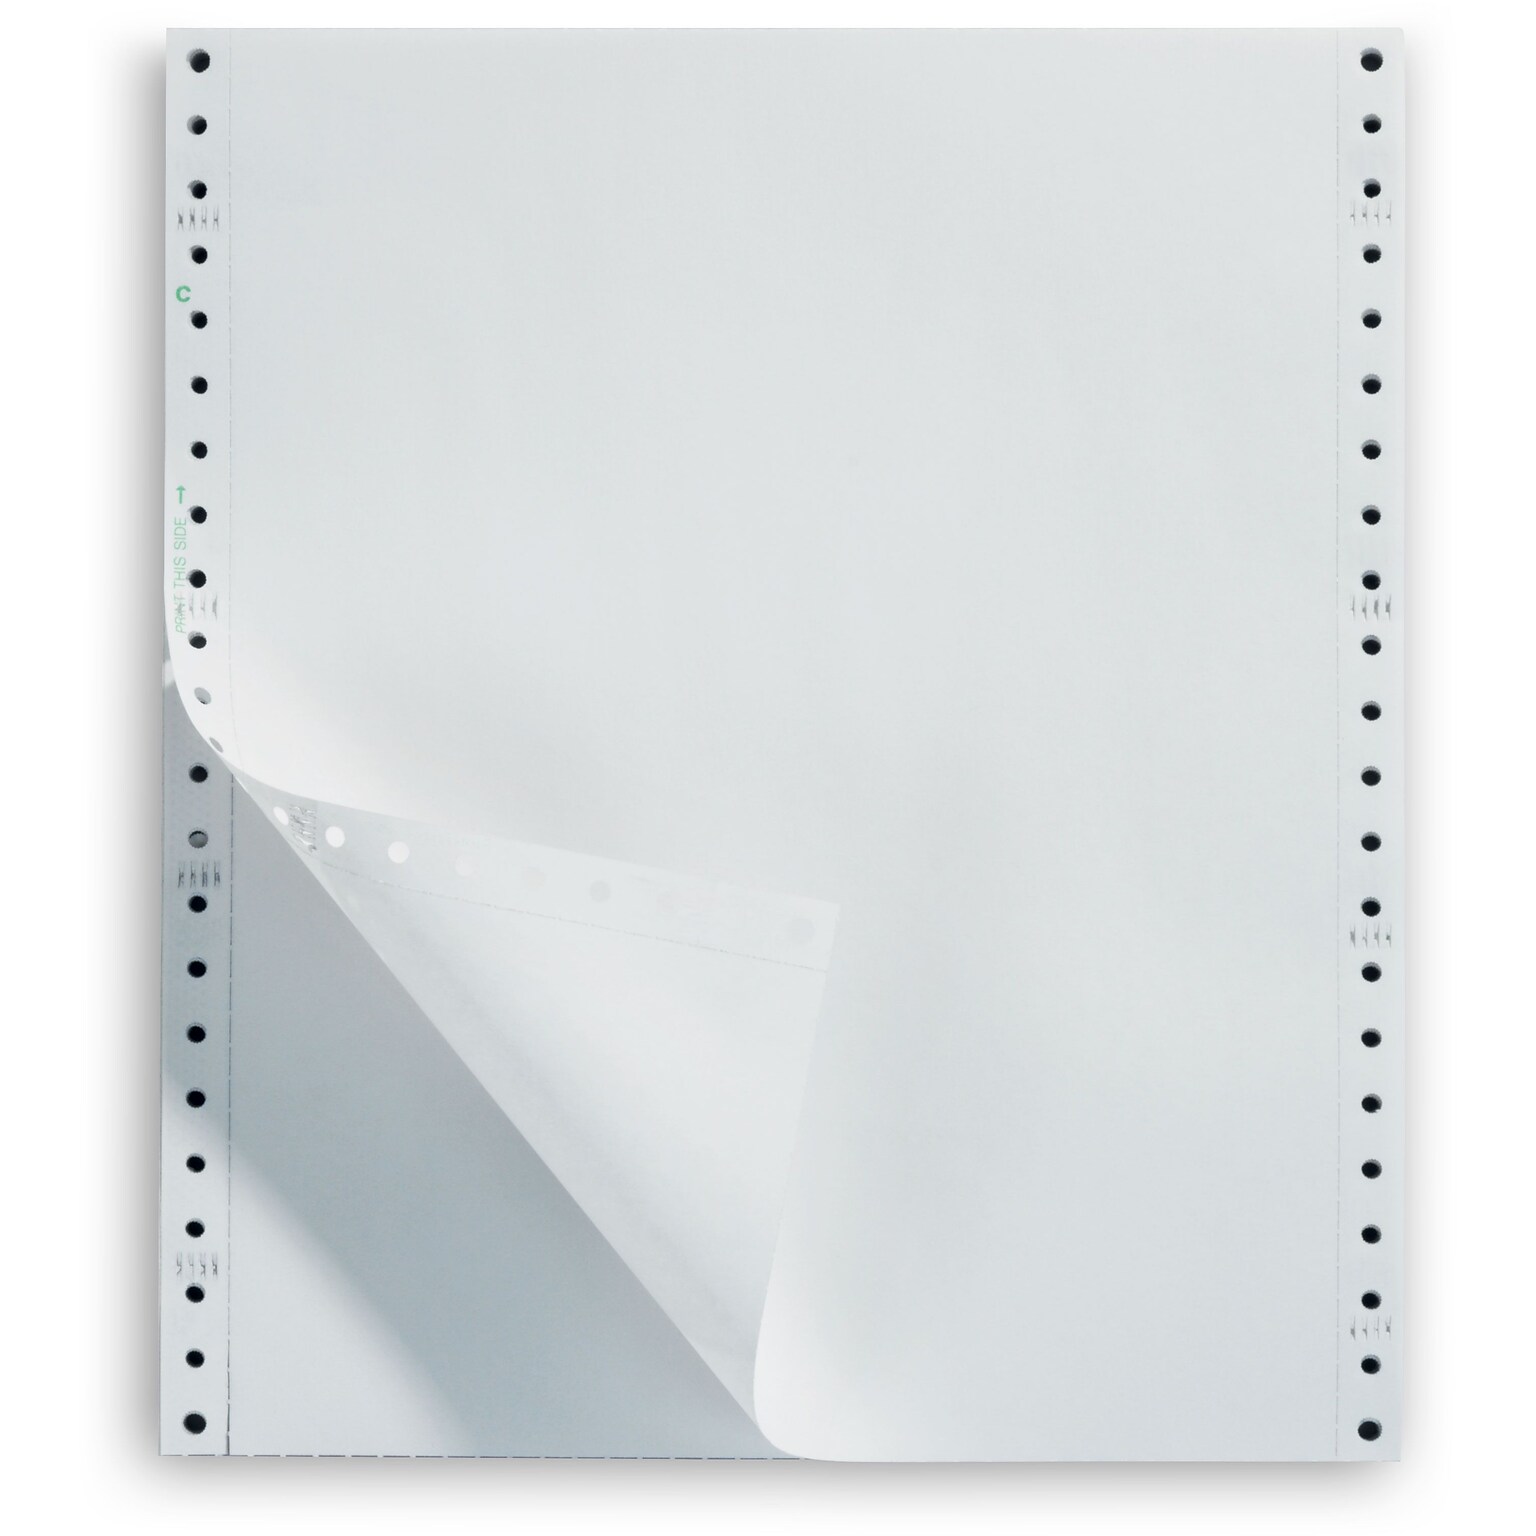 White Continuous Form Paper, 1-Part, 18 lb., 9-1/2x11, 2,500/Box, Recycled